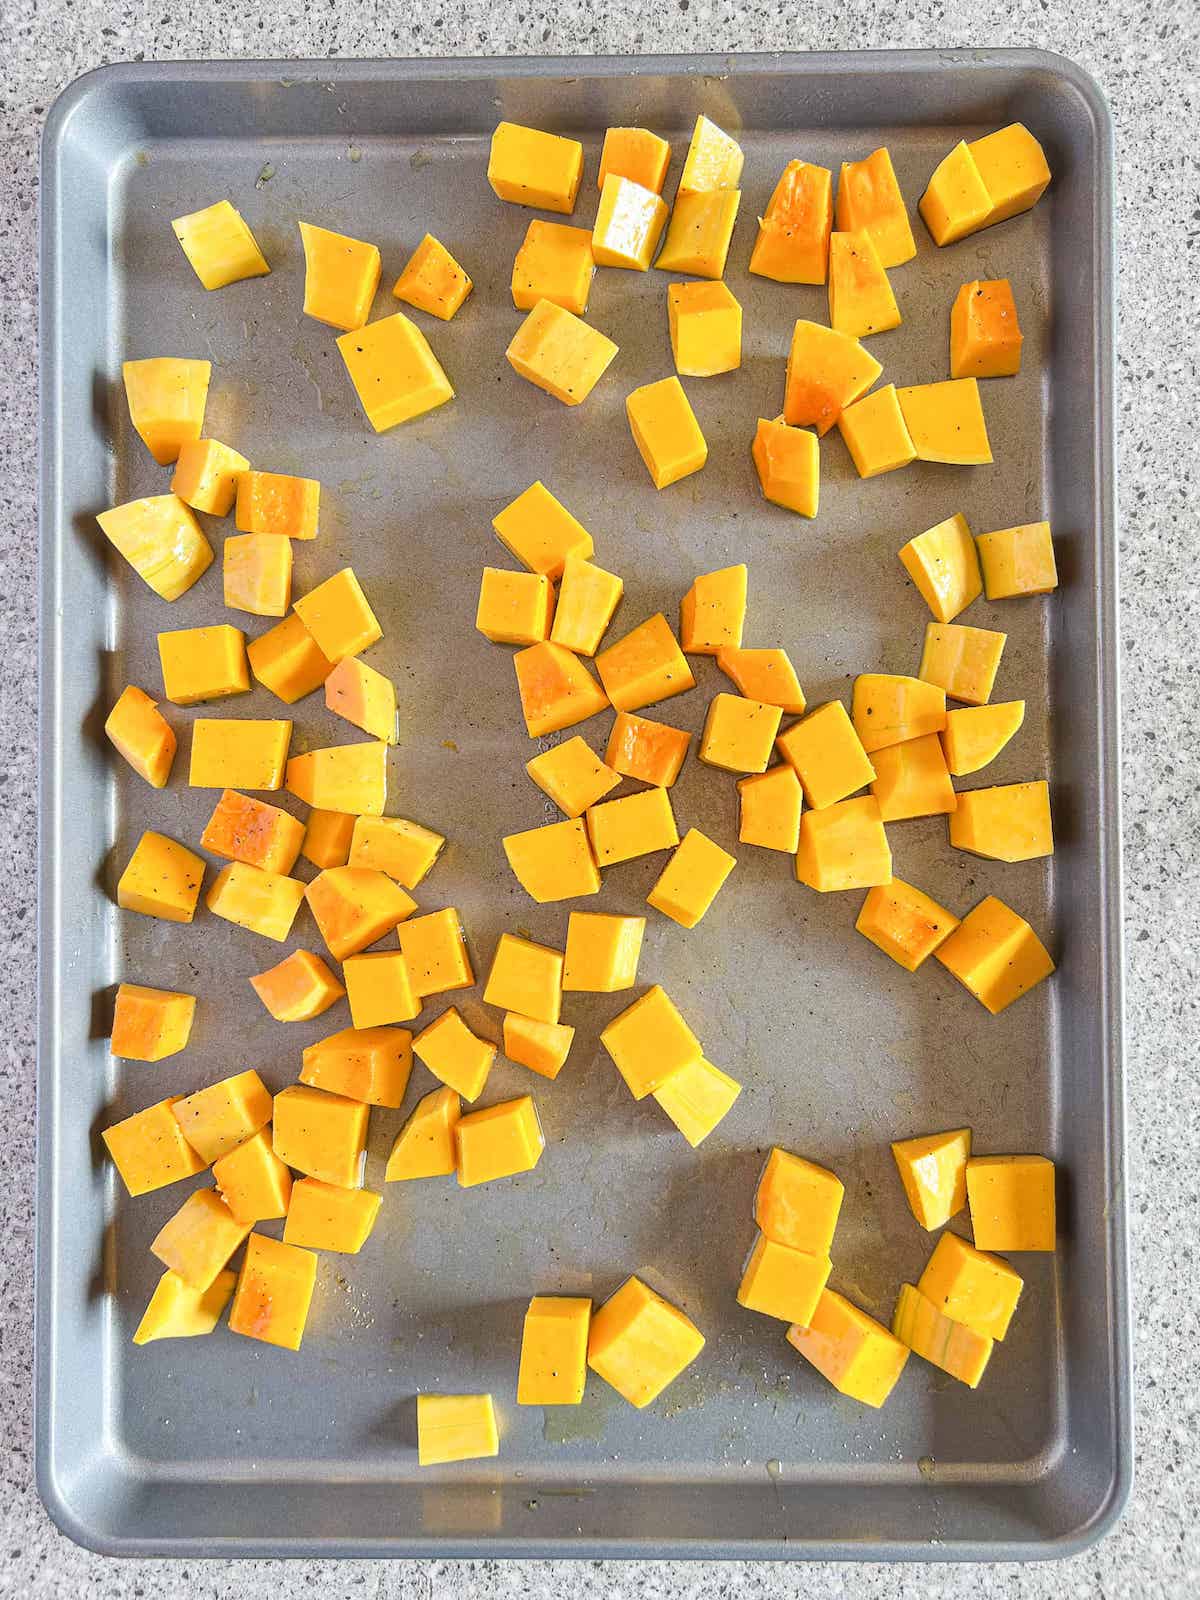 Cubed roasted butternut squash on a baking sheet.